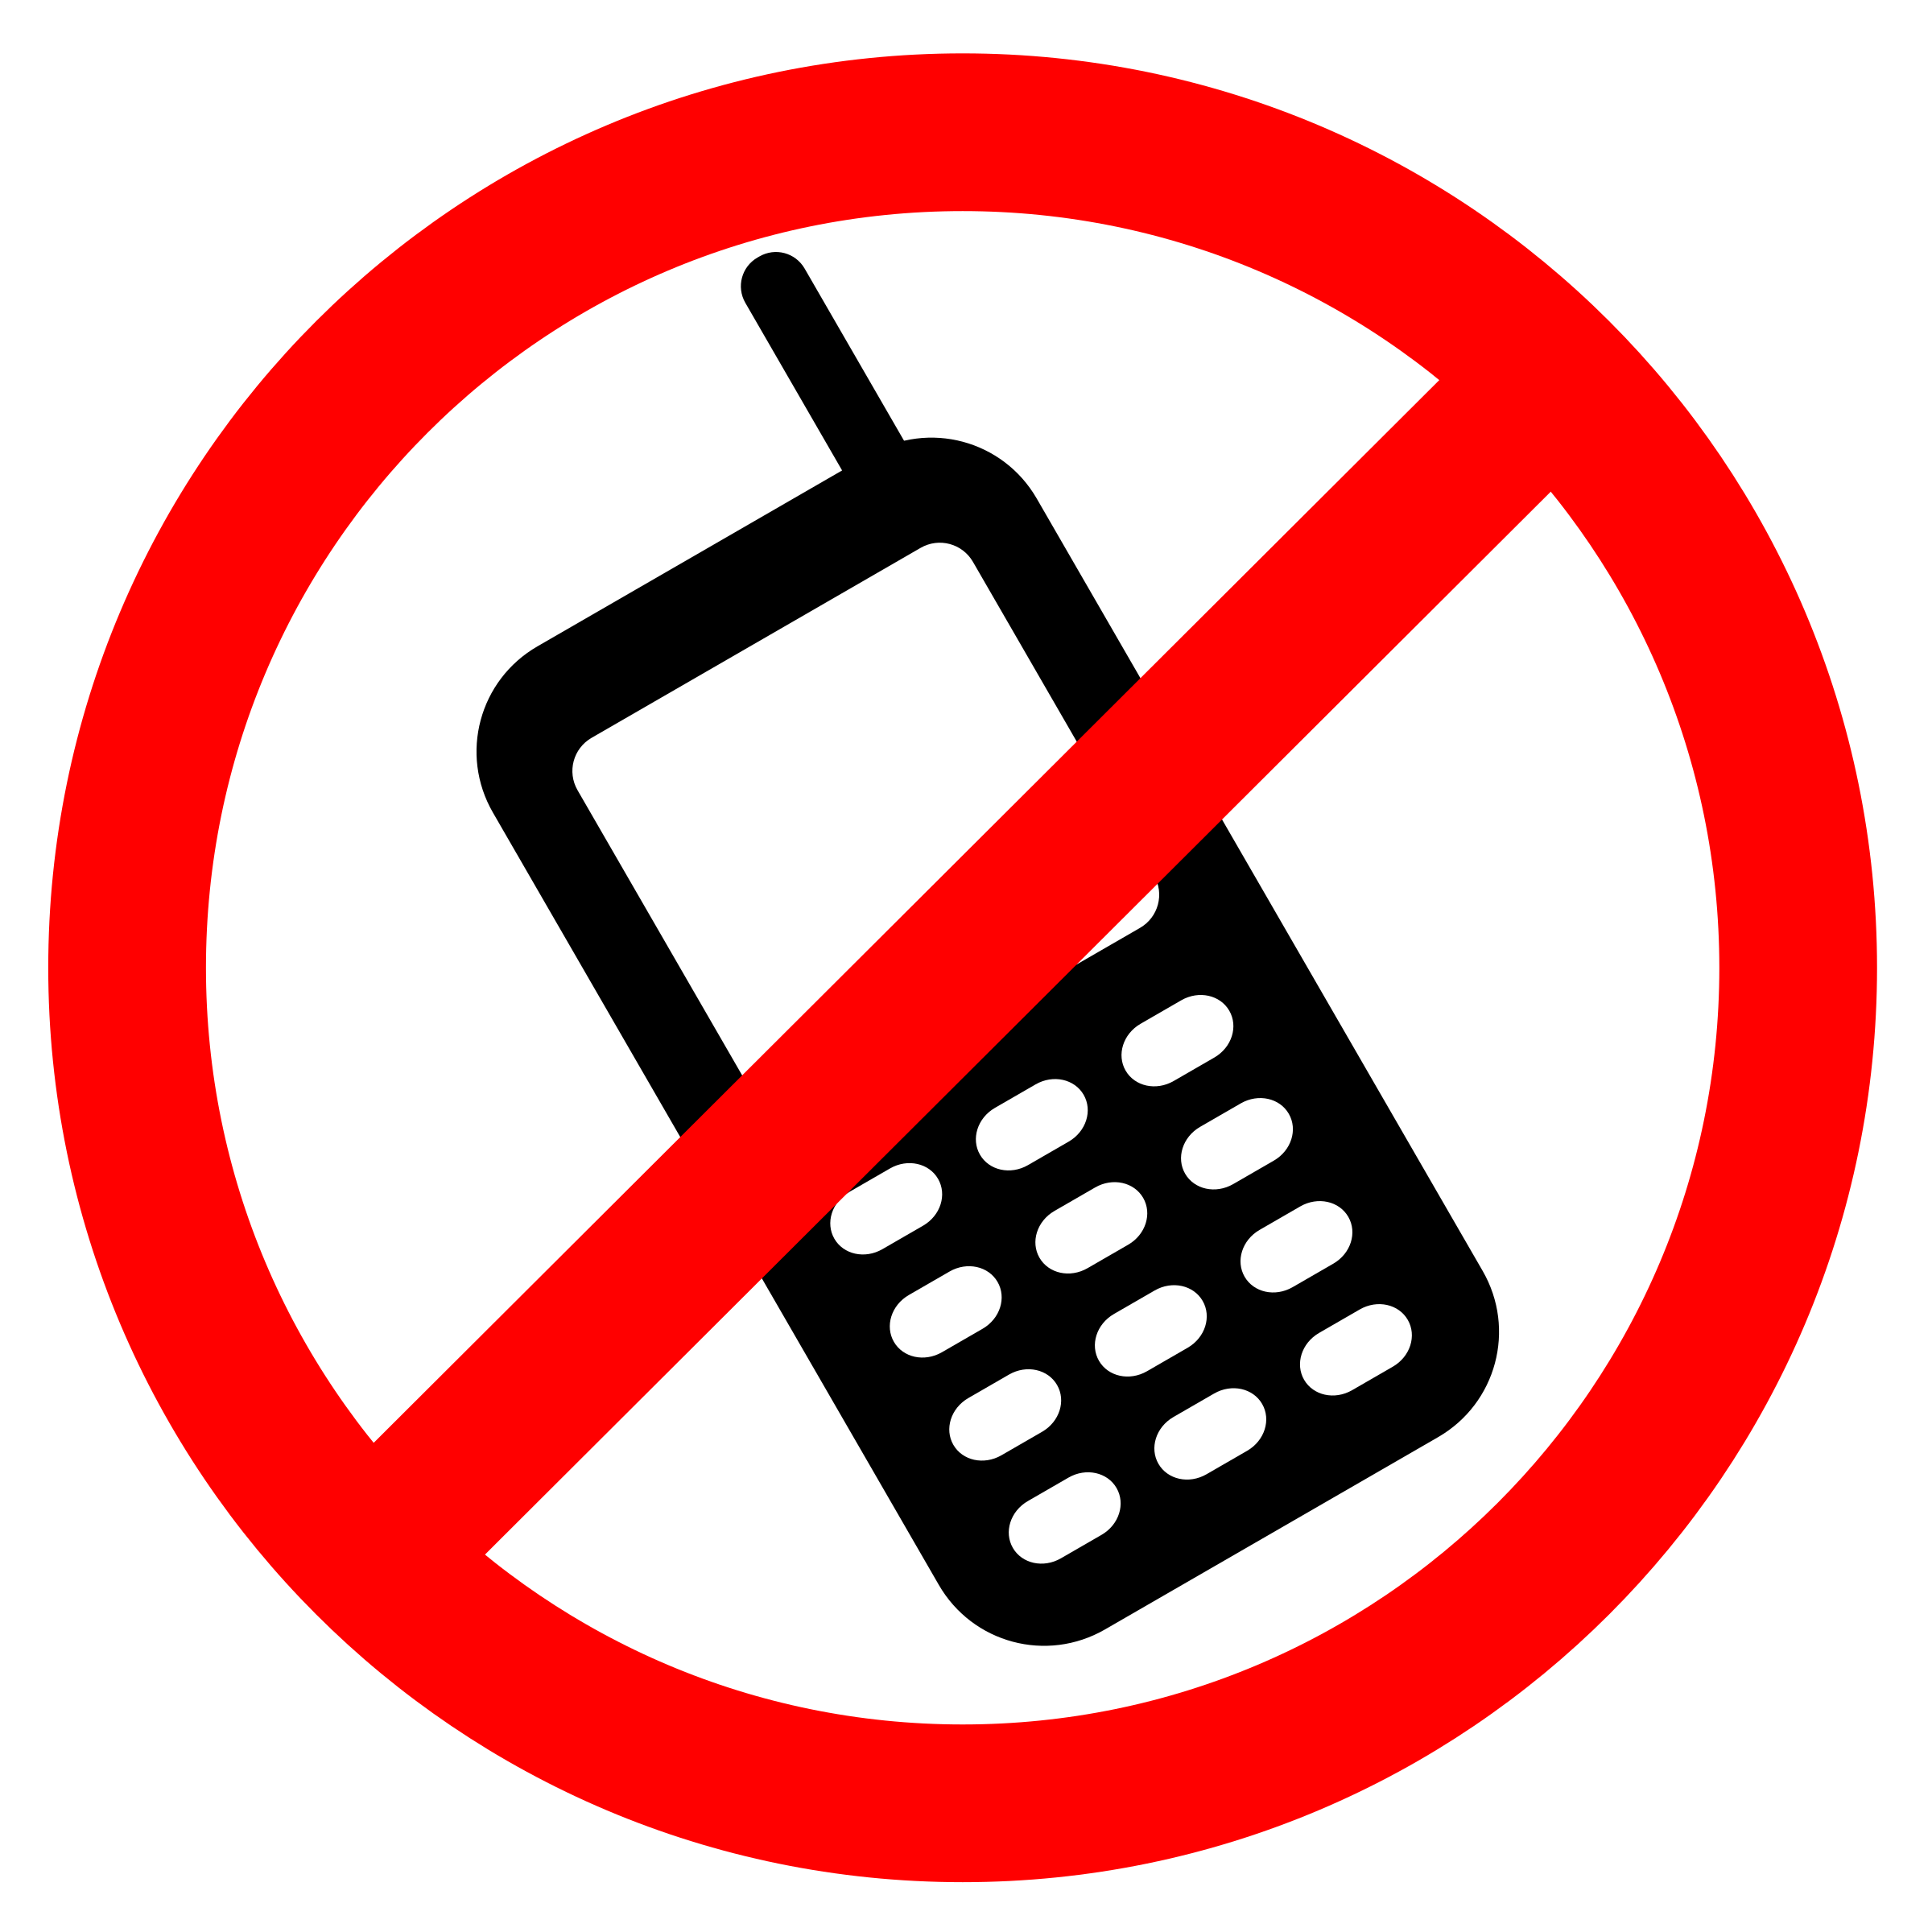 No Cell Phones Allowed - Cell Phone Images Clip Art